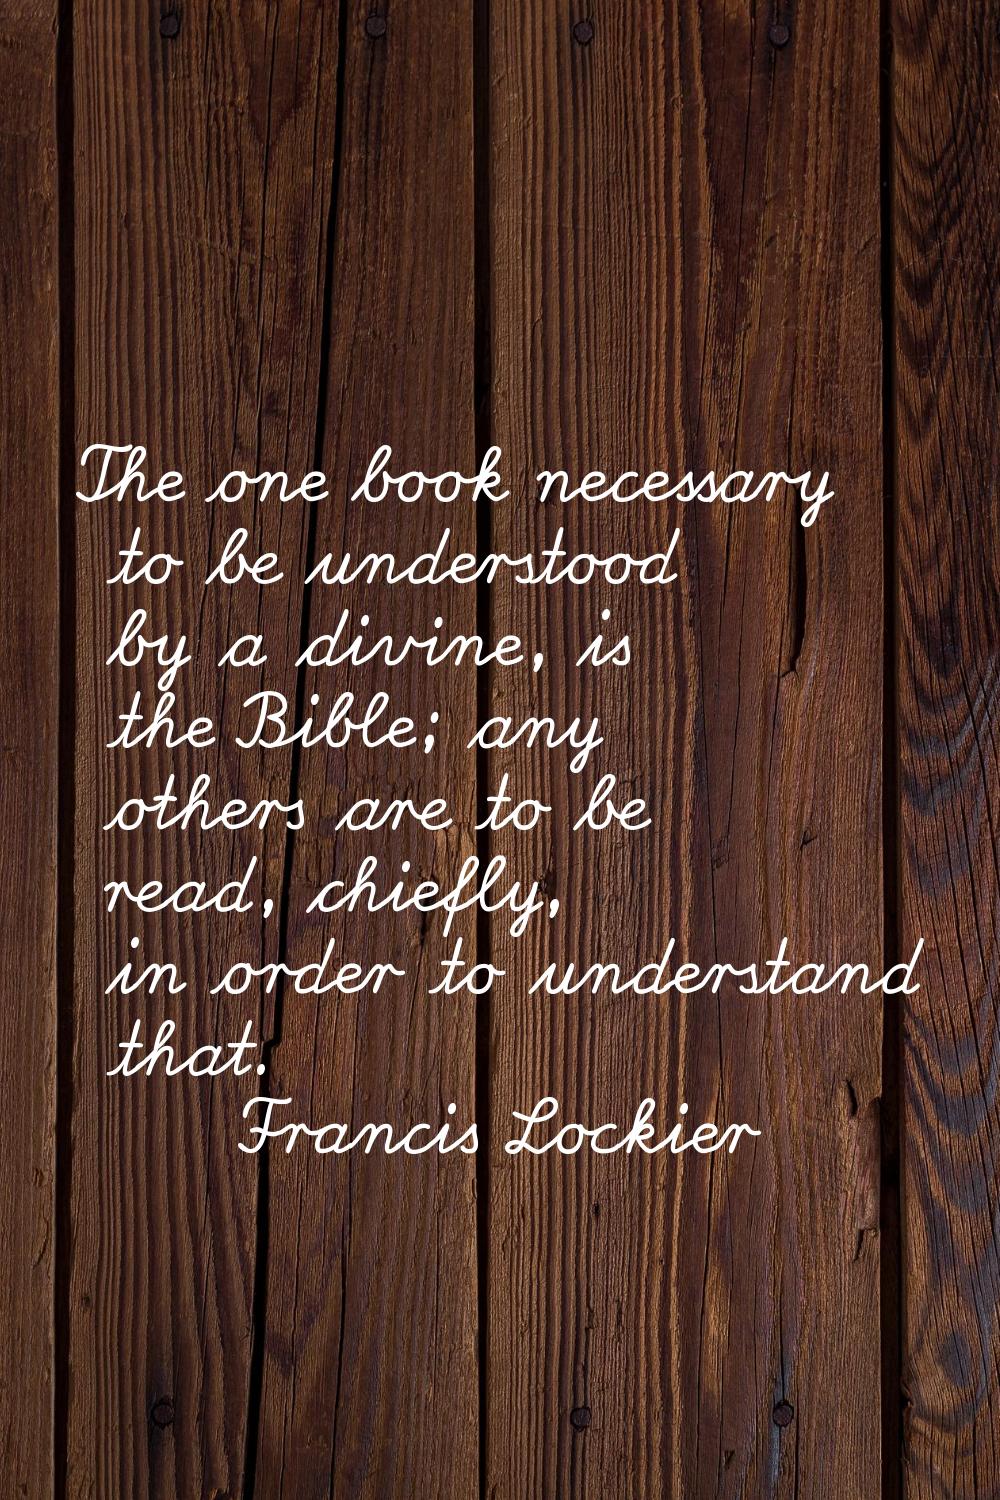 The one book necessary to be understood by a divine, is the Bible; any others are to be read, chief